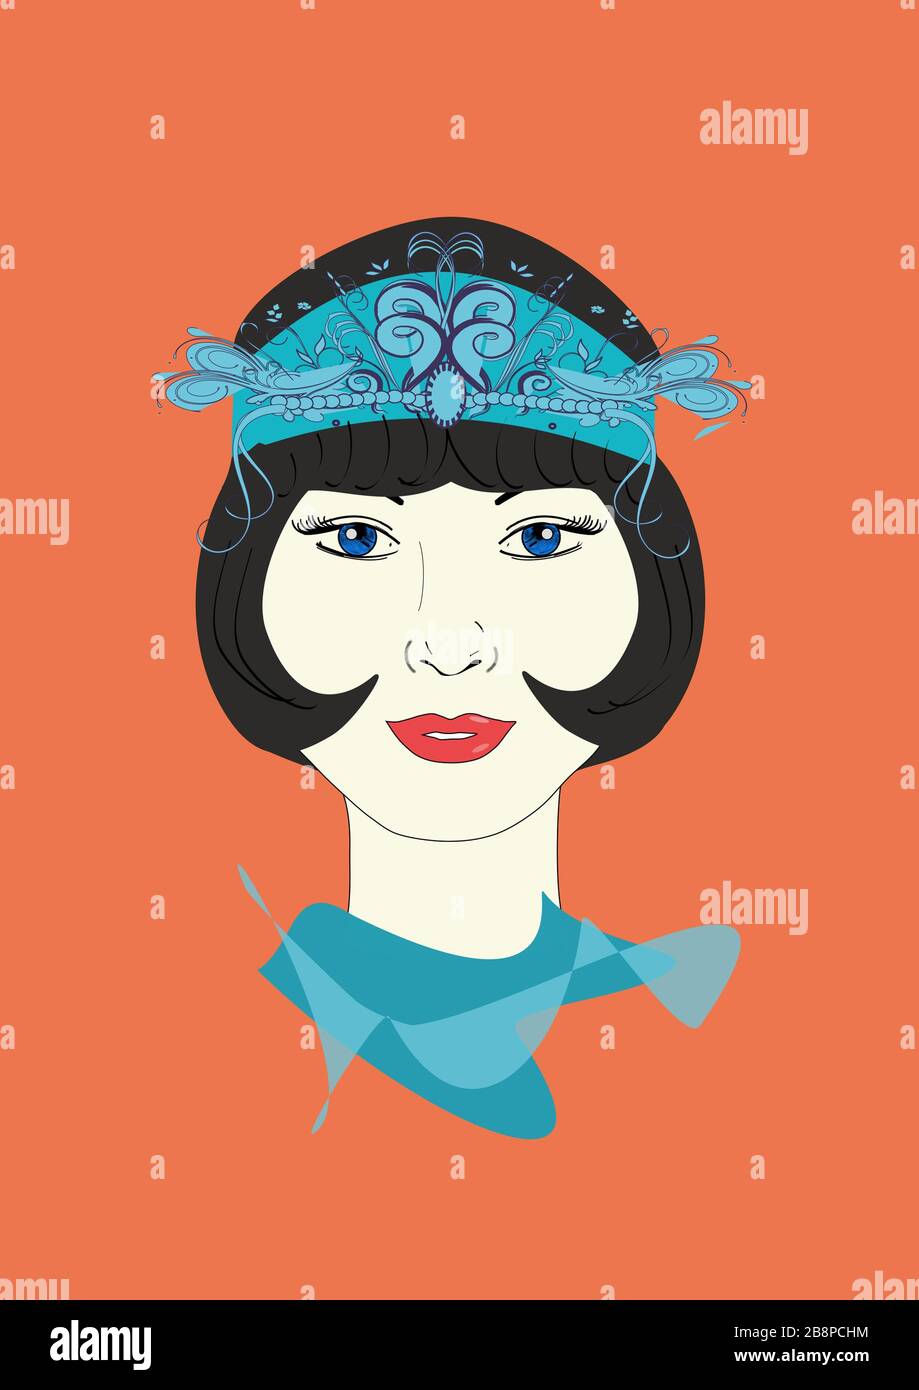 A graphic illustration of a 1920s Flapper in an ornate turquoise headpiece. Stock Photo